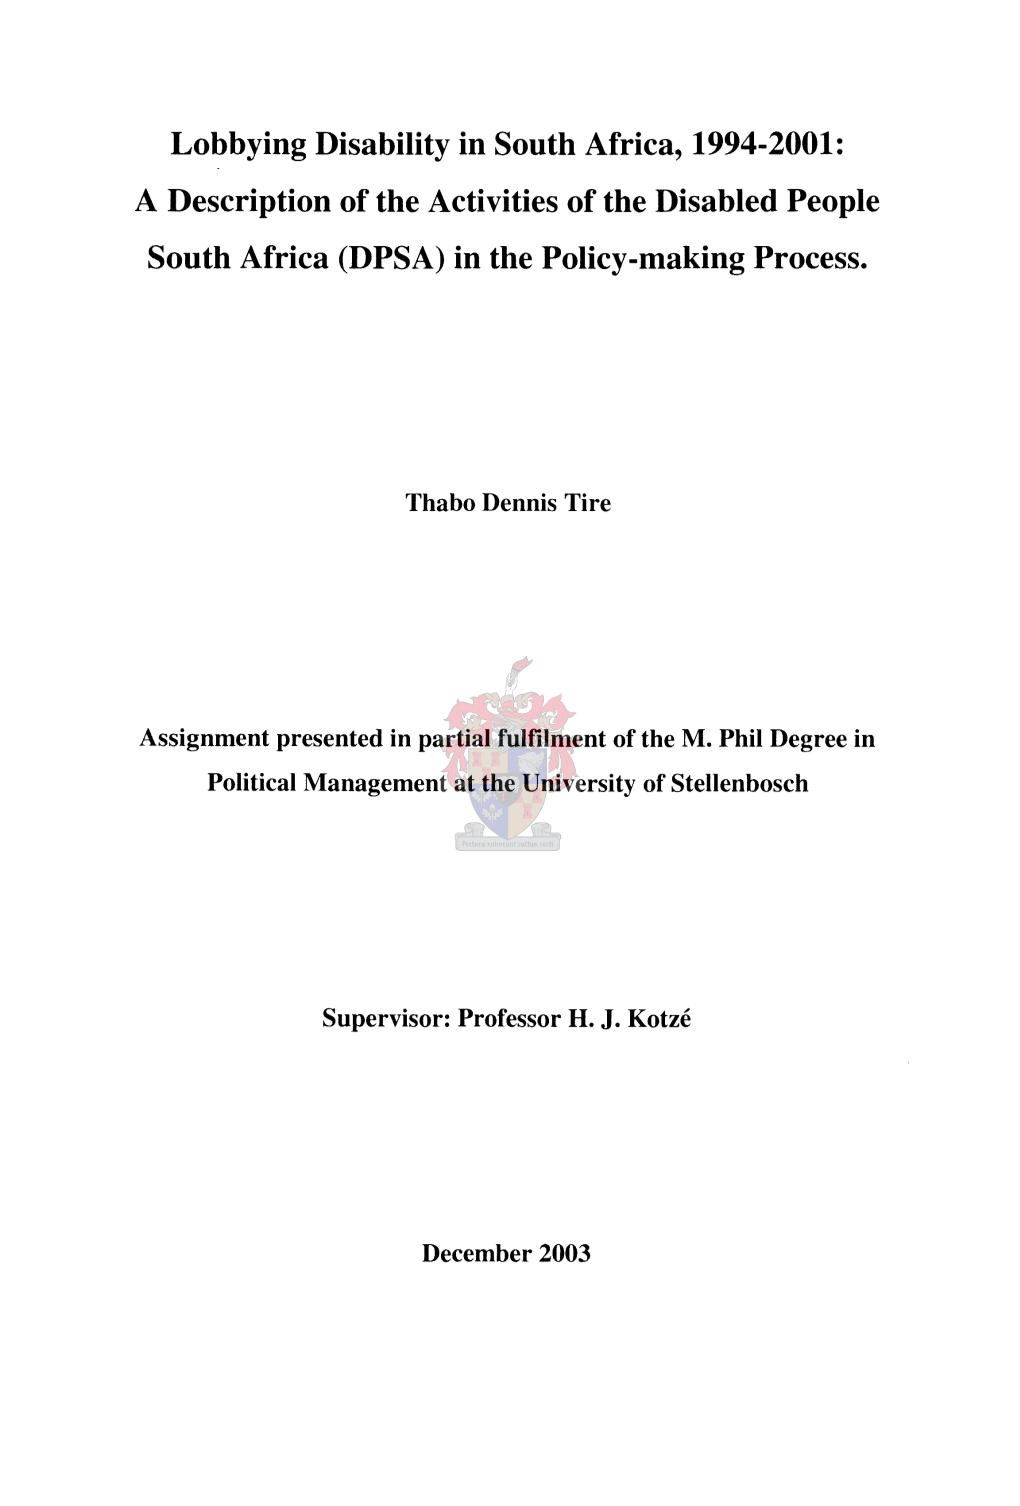 Lobbying Disability in South Africa, 1994-2001: a Description of the Activities of the Disabled People South Africa (DPSA) in the Policy-Making Process